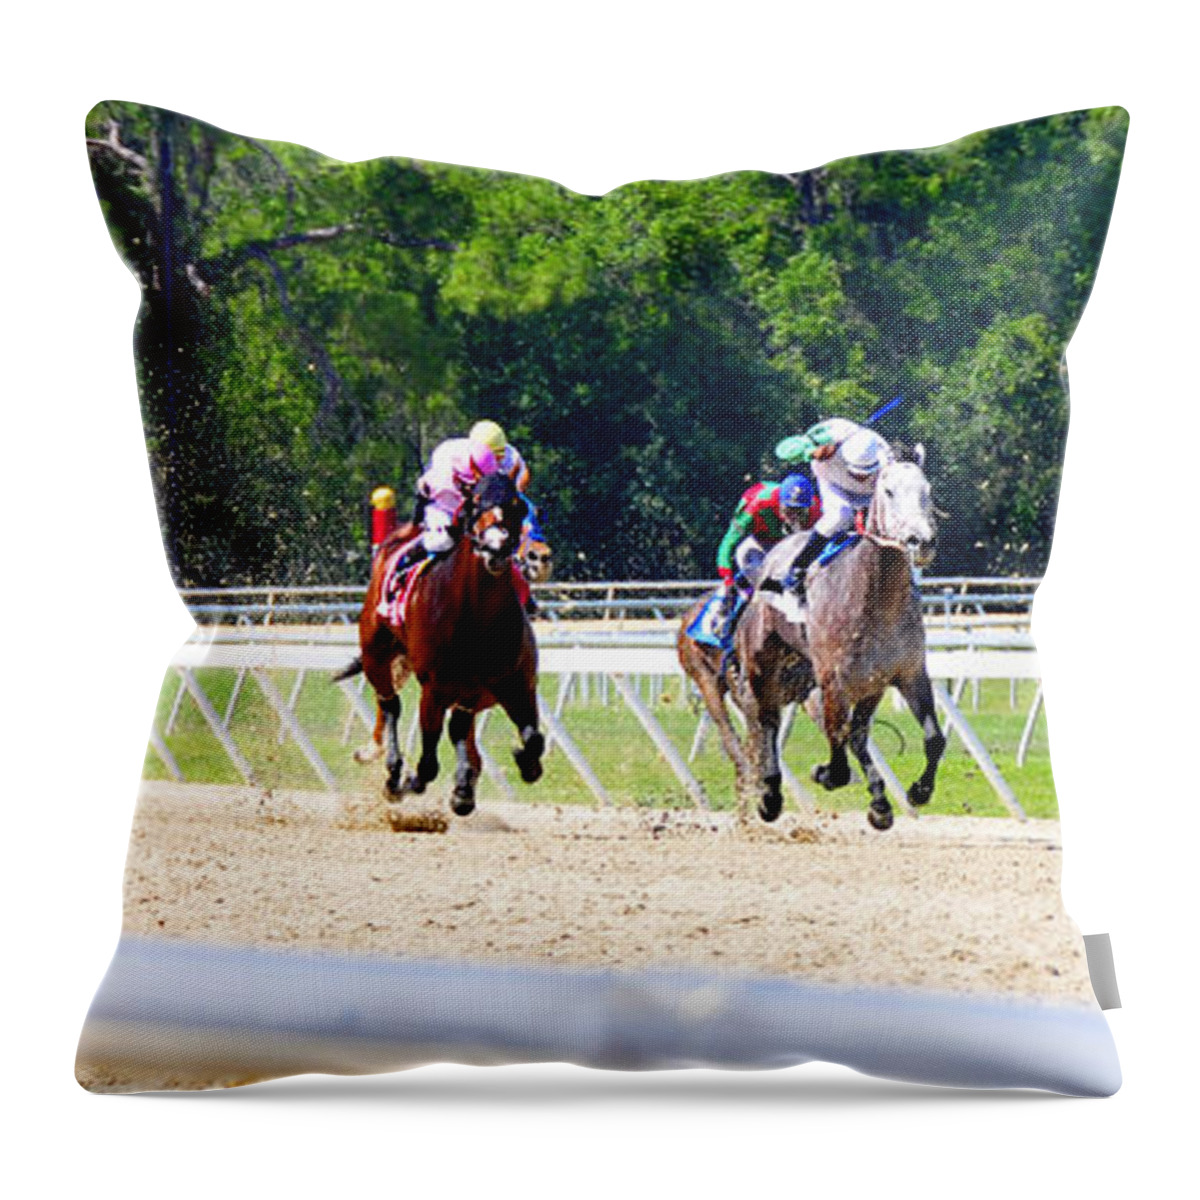 Tampa Bay Downs Throw Pillow featuring the photograph Home stretch by David Lee Thompson